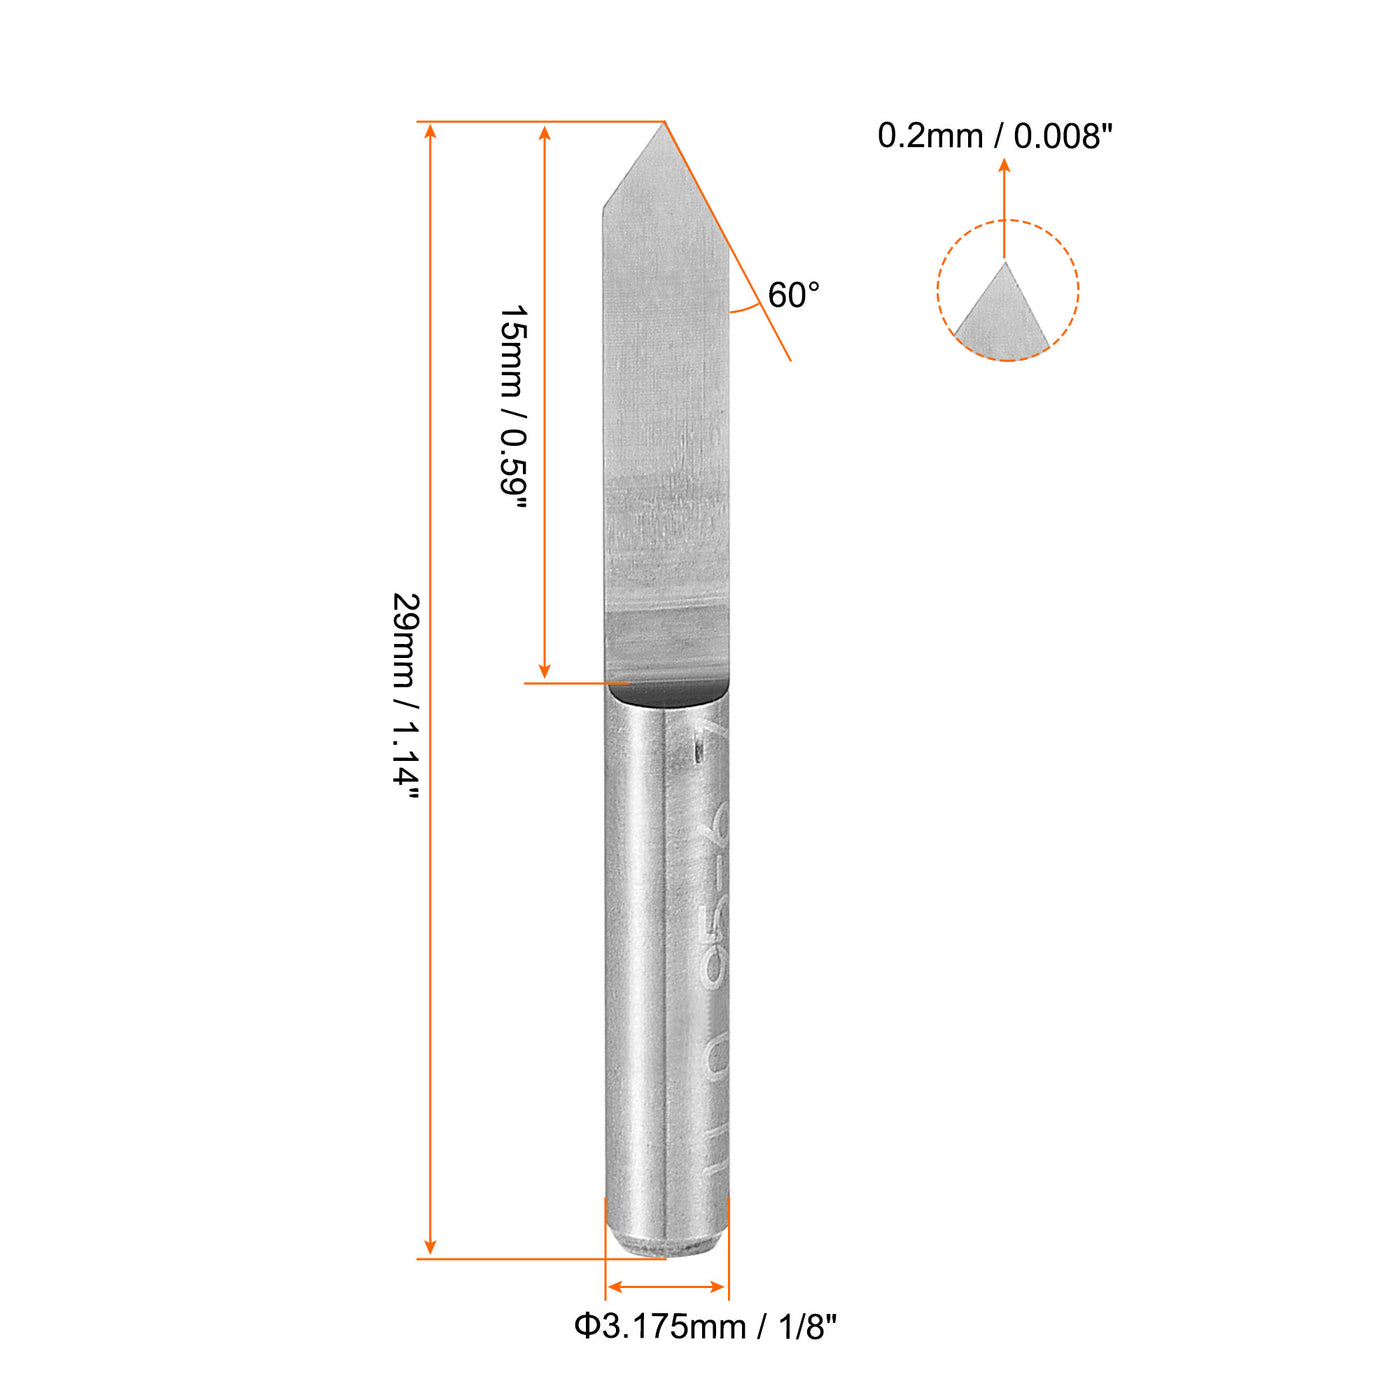 uxcell Uxcell 1/8" Shank 0.2mm Tip 60 Degree Carbide Wood Engraving Bit CNC Router Tool 10pcs